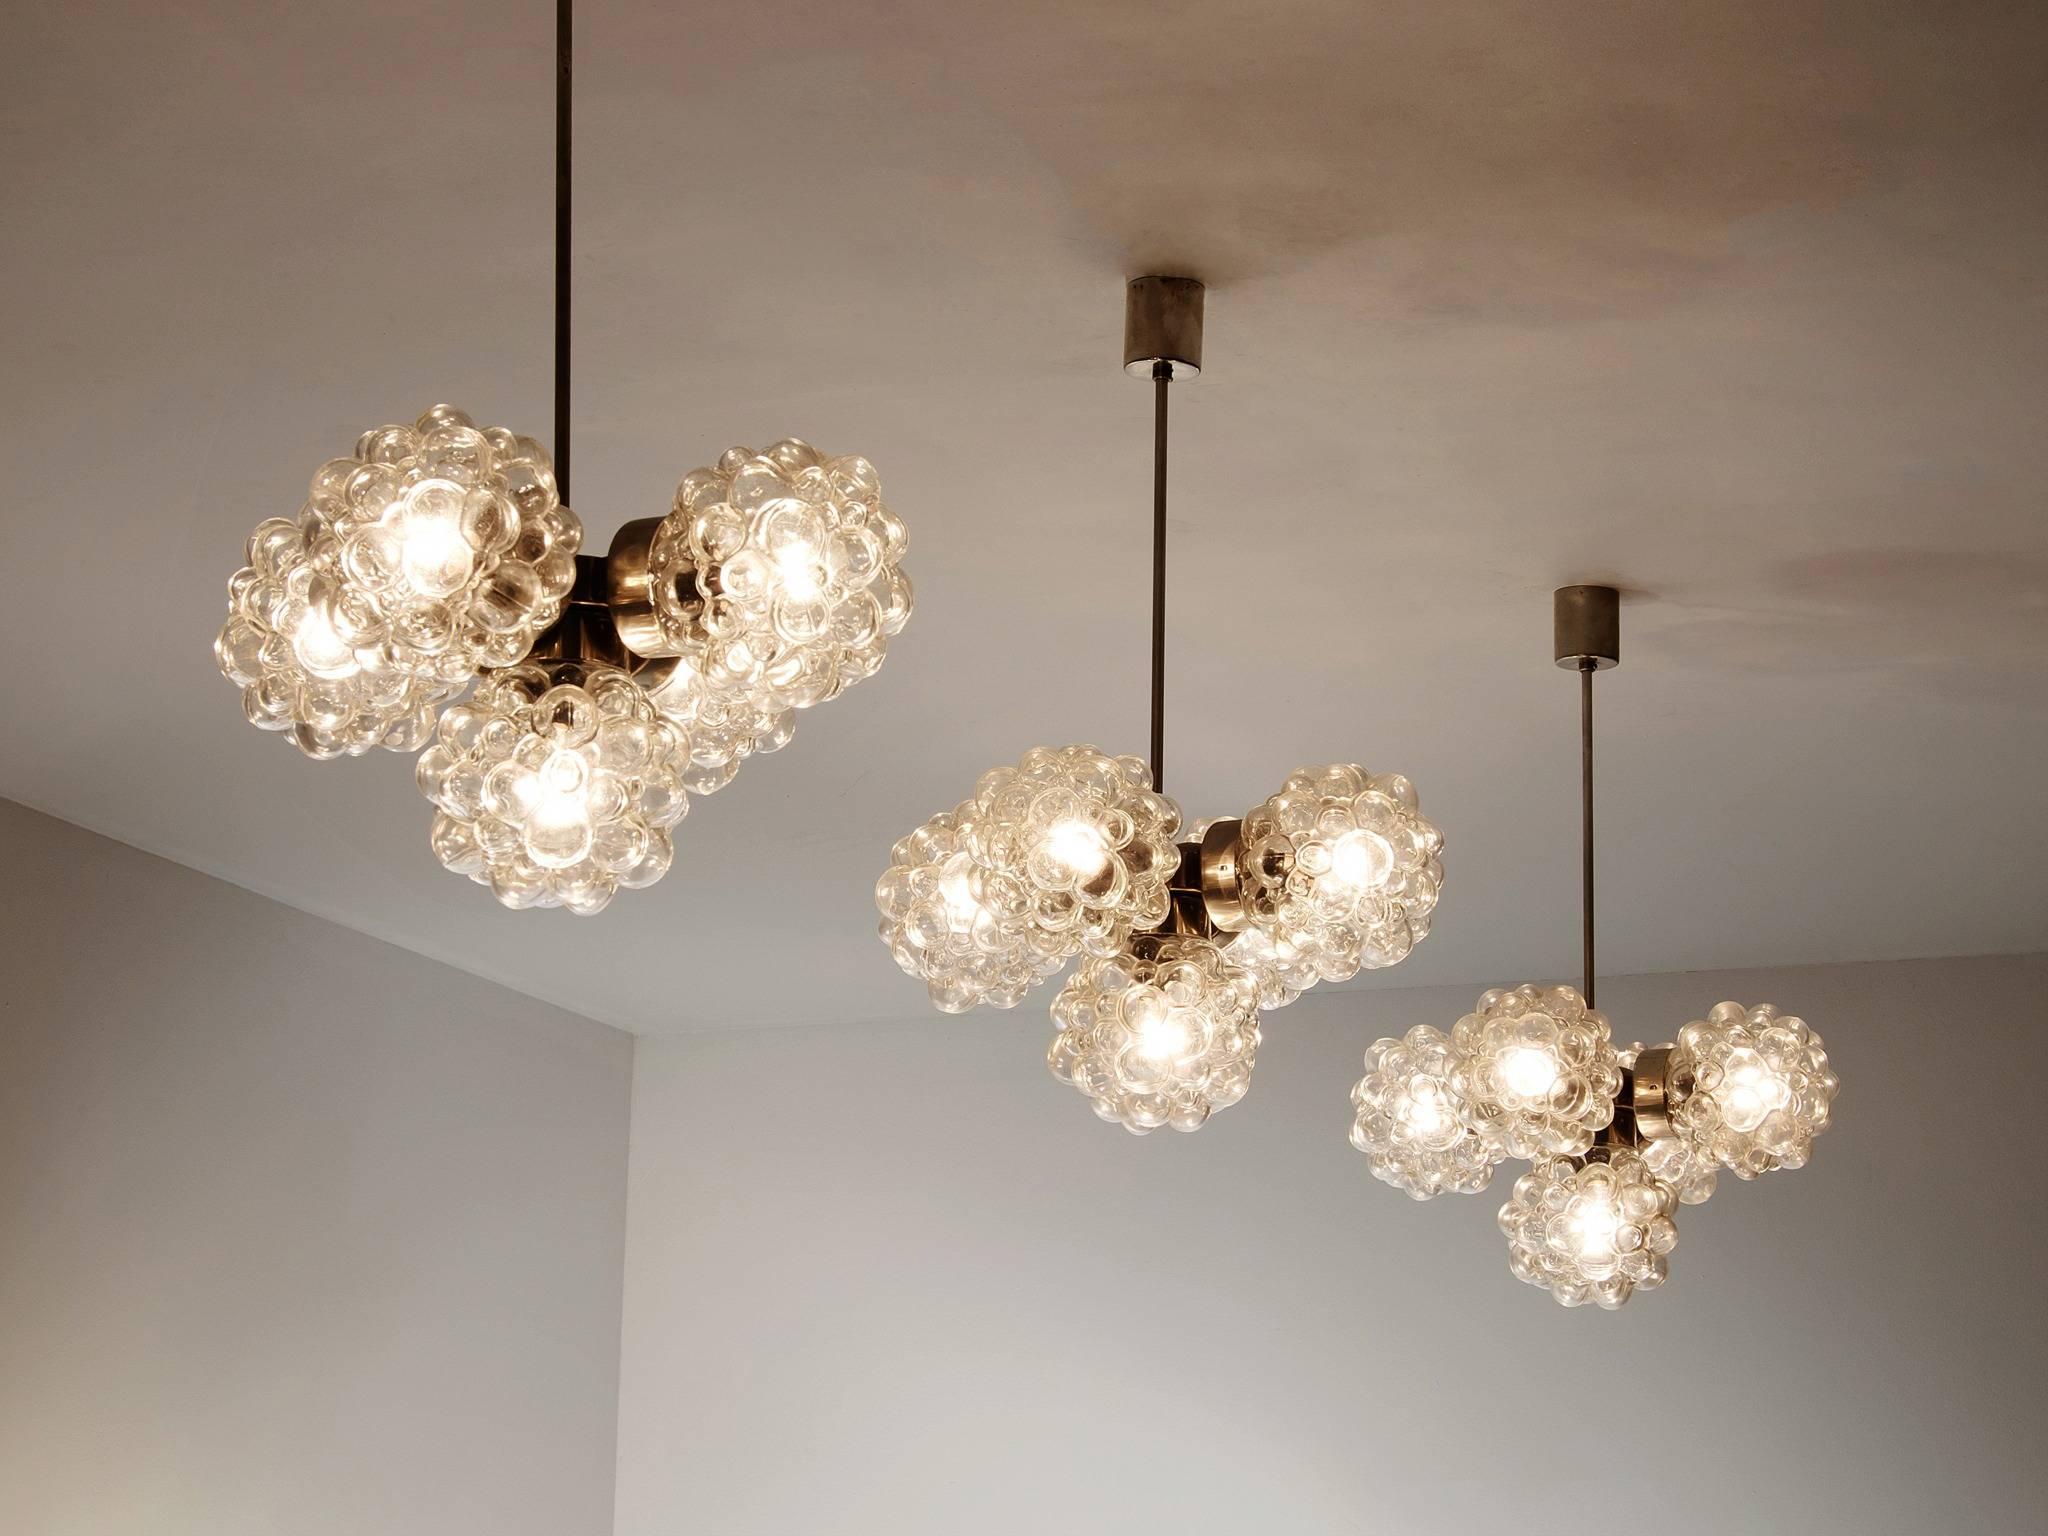 Set of 8 pendants, in metal and glass, designed by Helena Tynell, Europe, 1970s. 

Large set of structured glass chandeliers. Each light has five spheres, which makes sure the light gets nicely divided over the room. The structured glass creates an